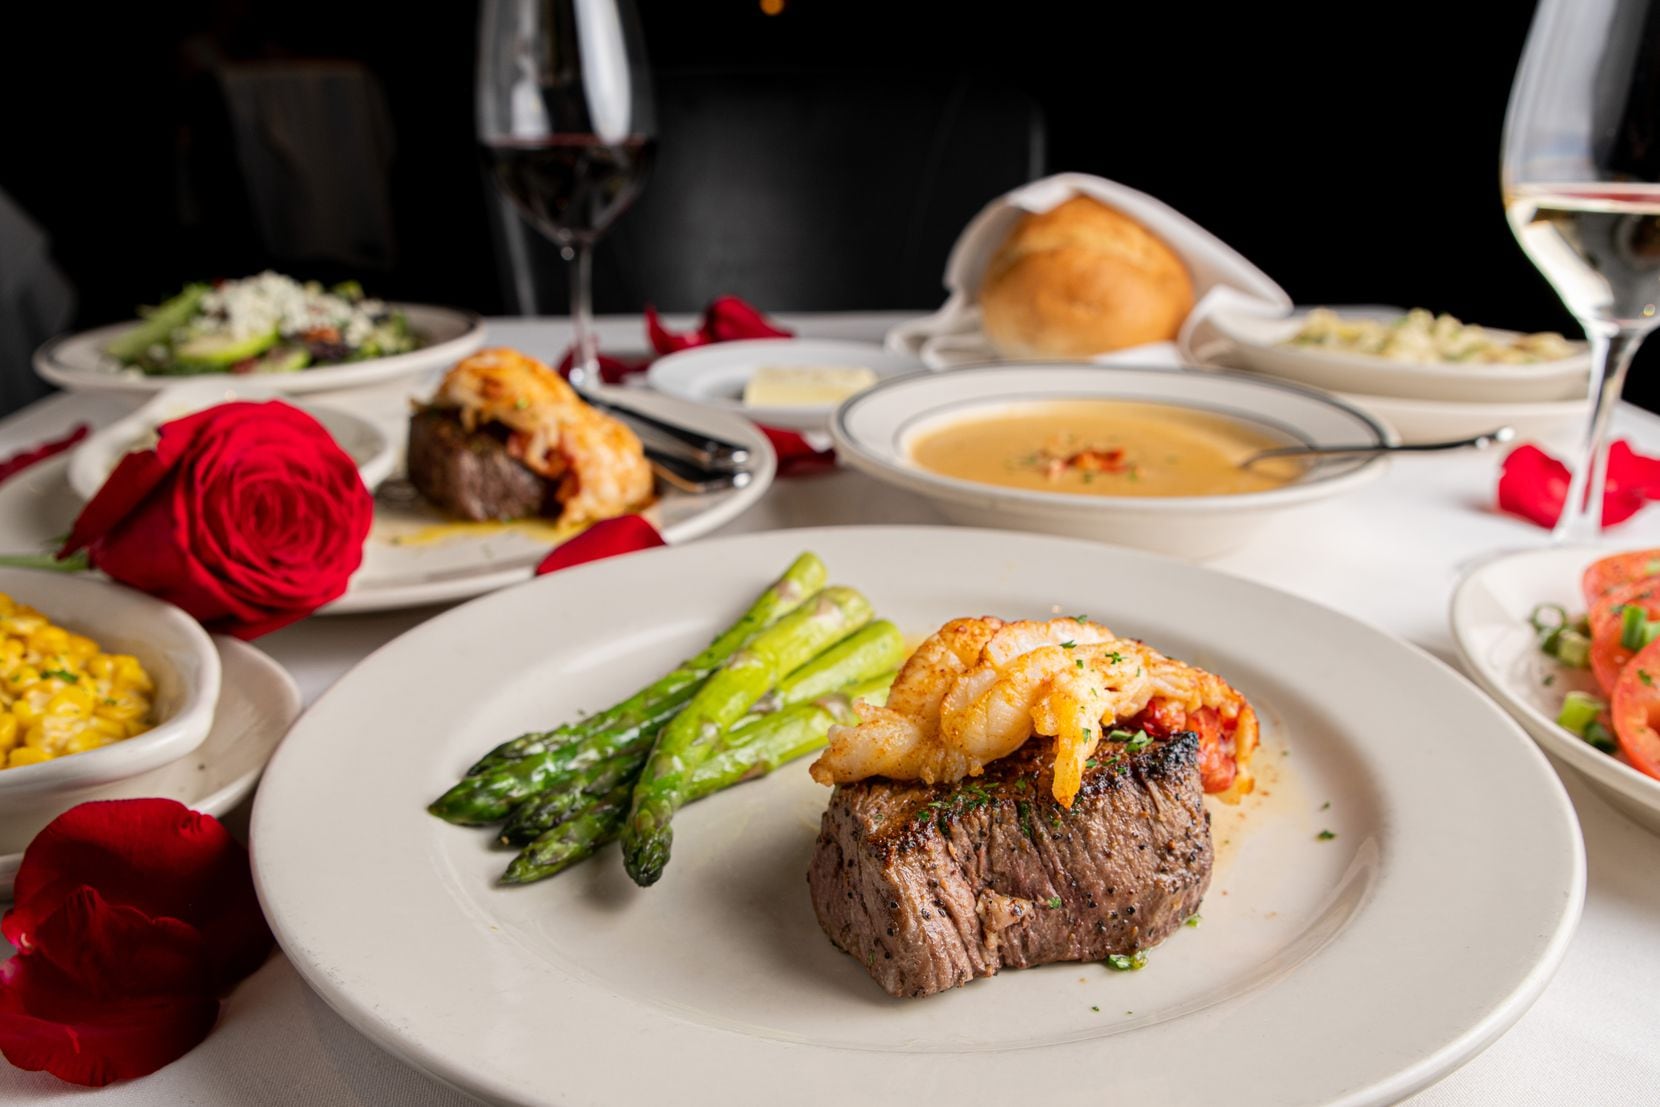 III Forks' Valentine's menu includes salted butter, vine-ripened tomatoes, filet mignon topped with cold water lobster tail with whipped potatoes and asparagus, lobster bisque, off-the-cob creamed corn and III Forks salad.